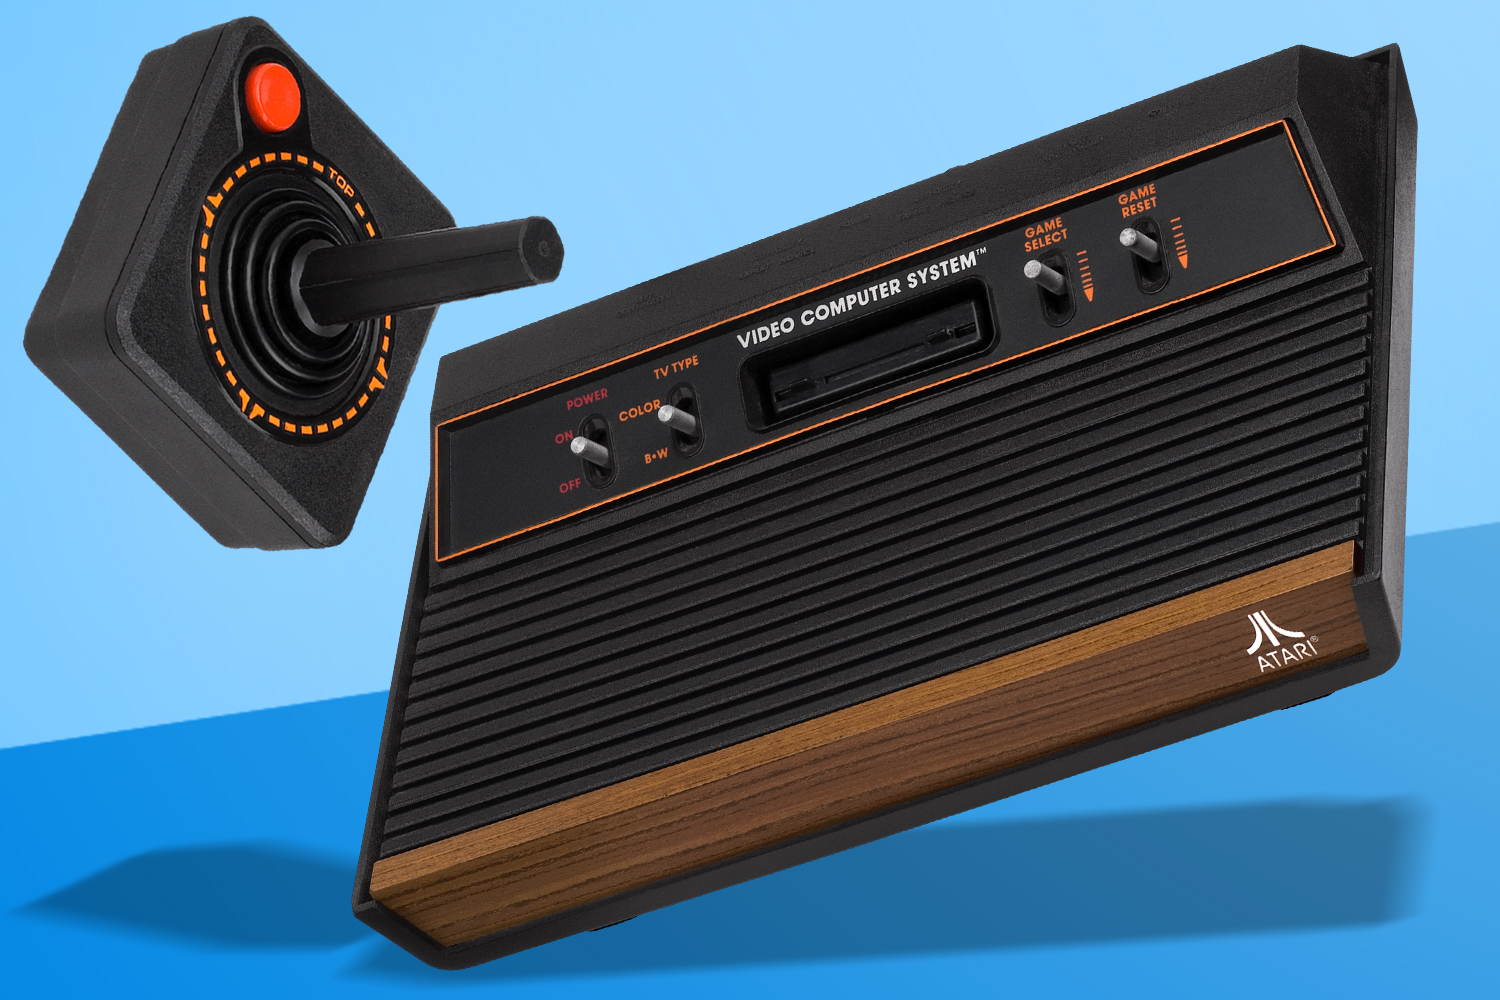 The Atari 2600+ Is a 'Modern Day Faithful Recreation' of the Classic  Console - IGN